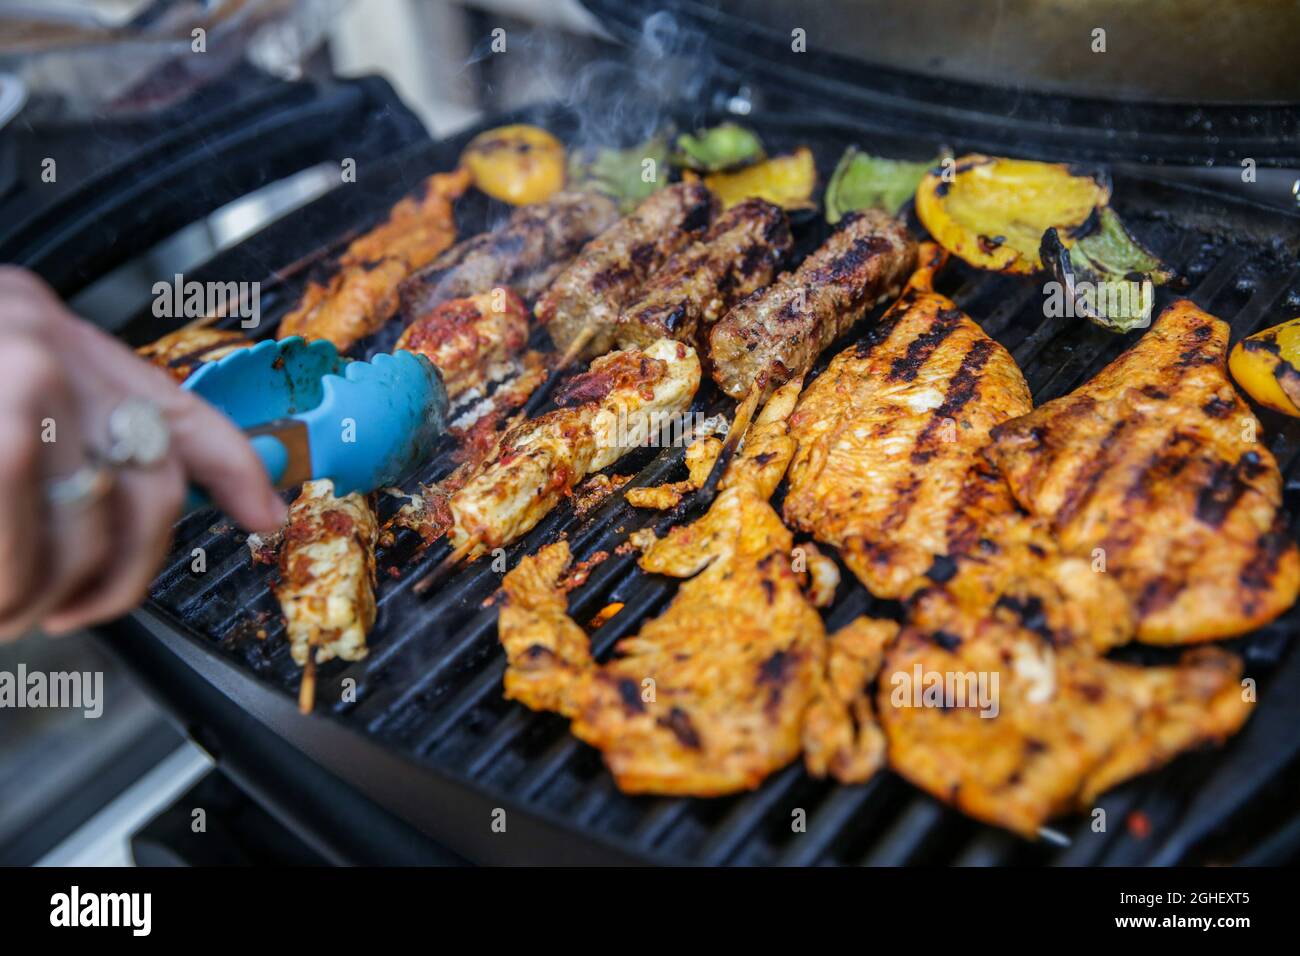 A person uses tongues to turn chicken and lamb cooking outdoors on a barbeque in London, England. Stock Photo